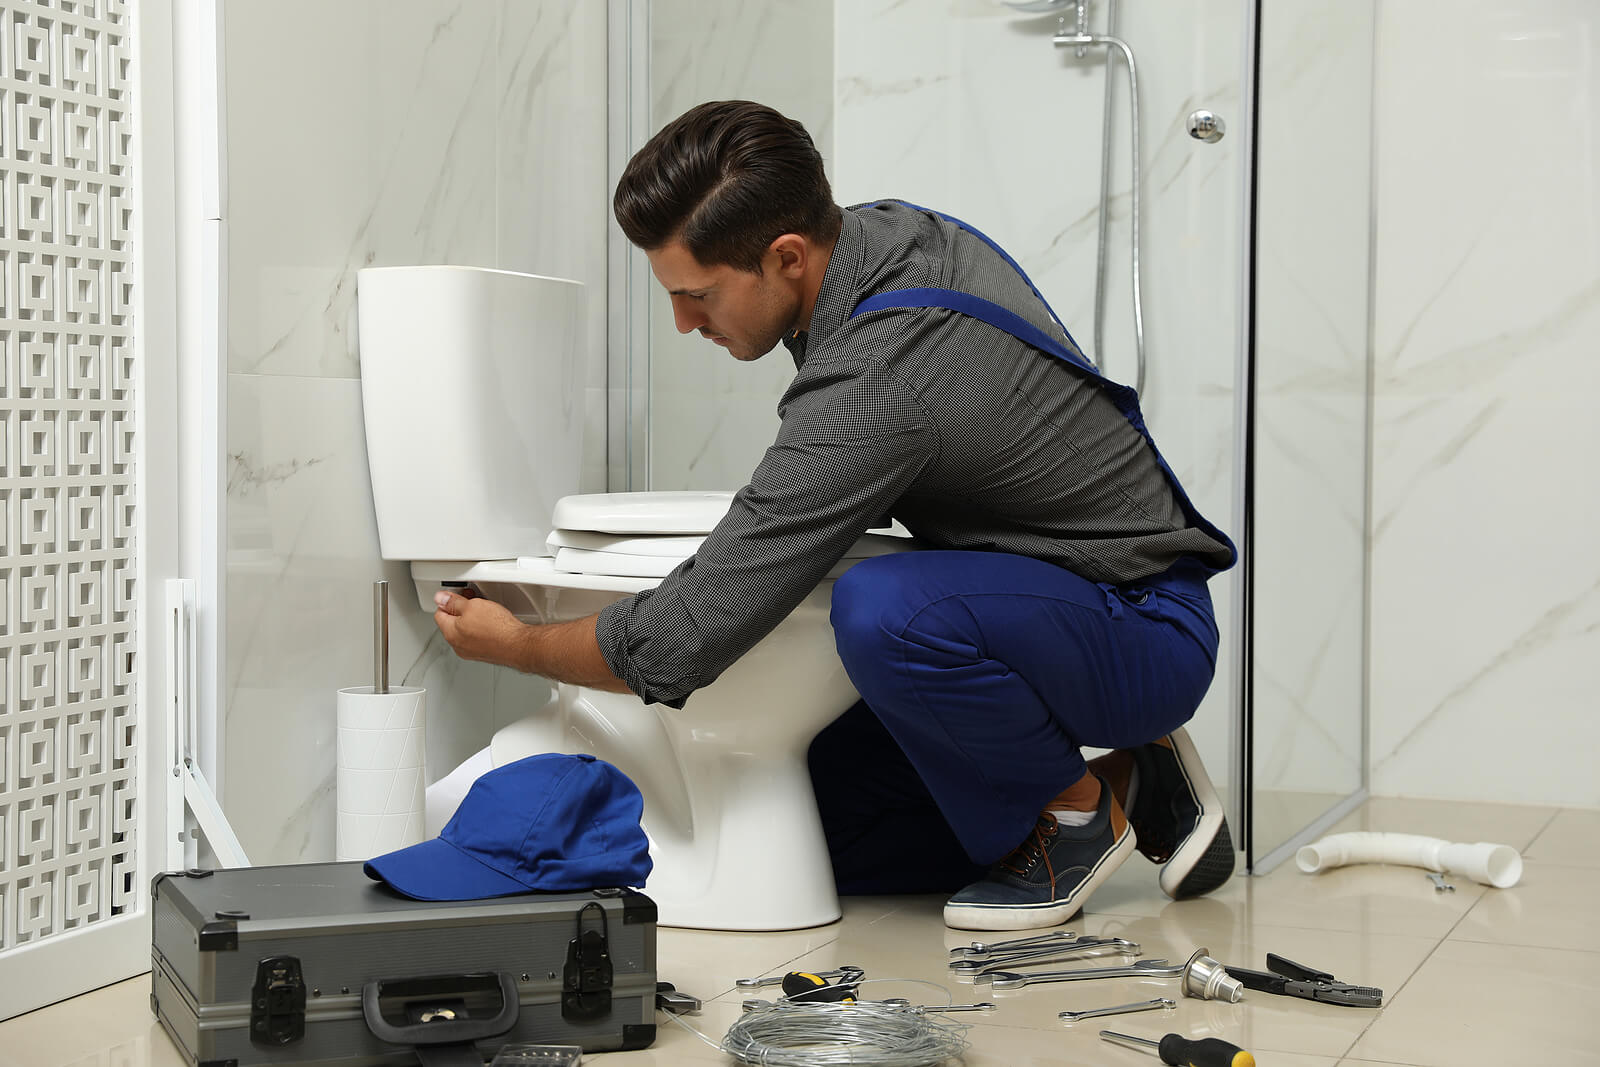 DIY Plumbing Guide to Fix a Leaky Toilet